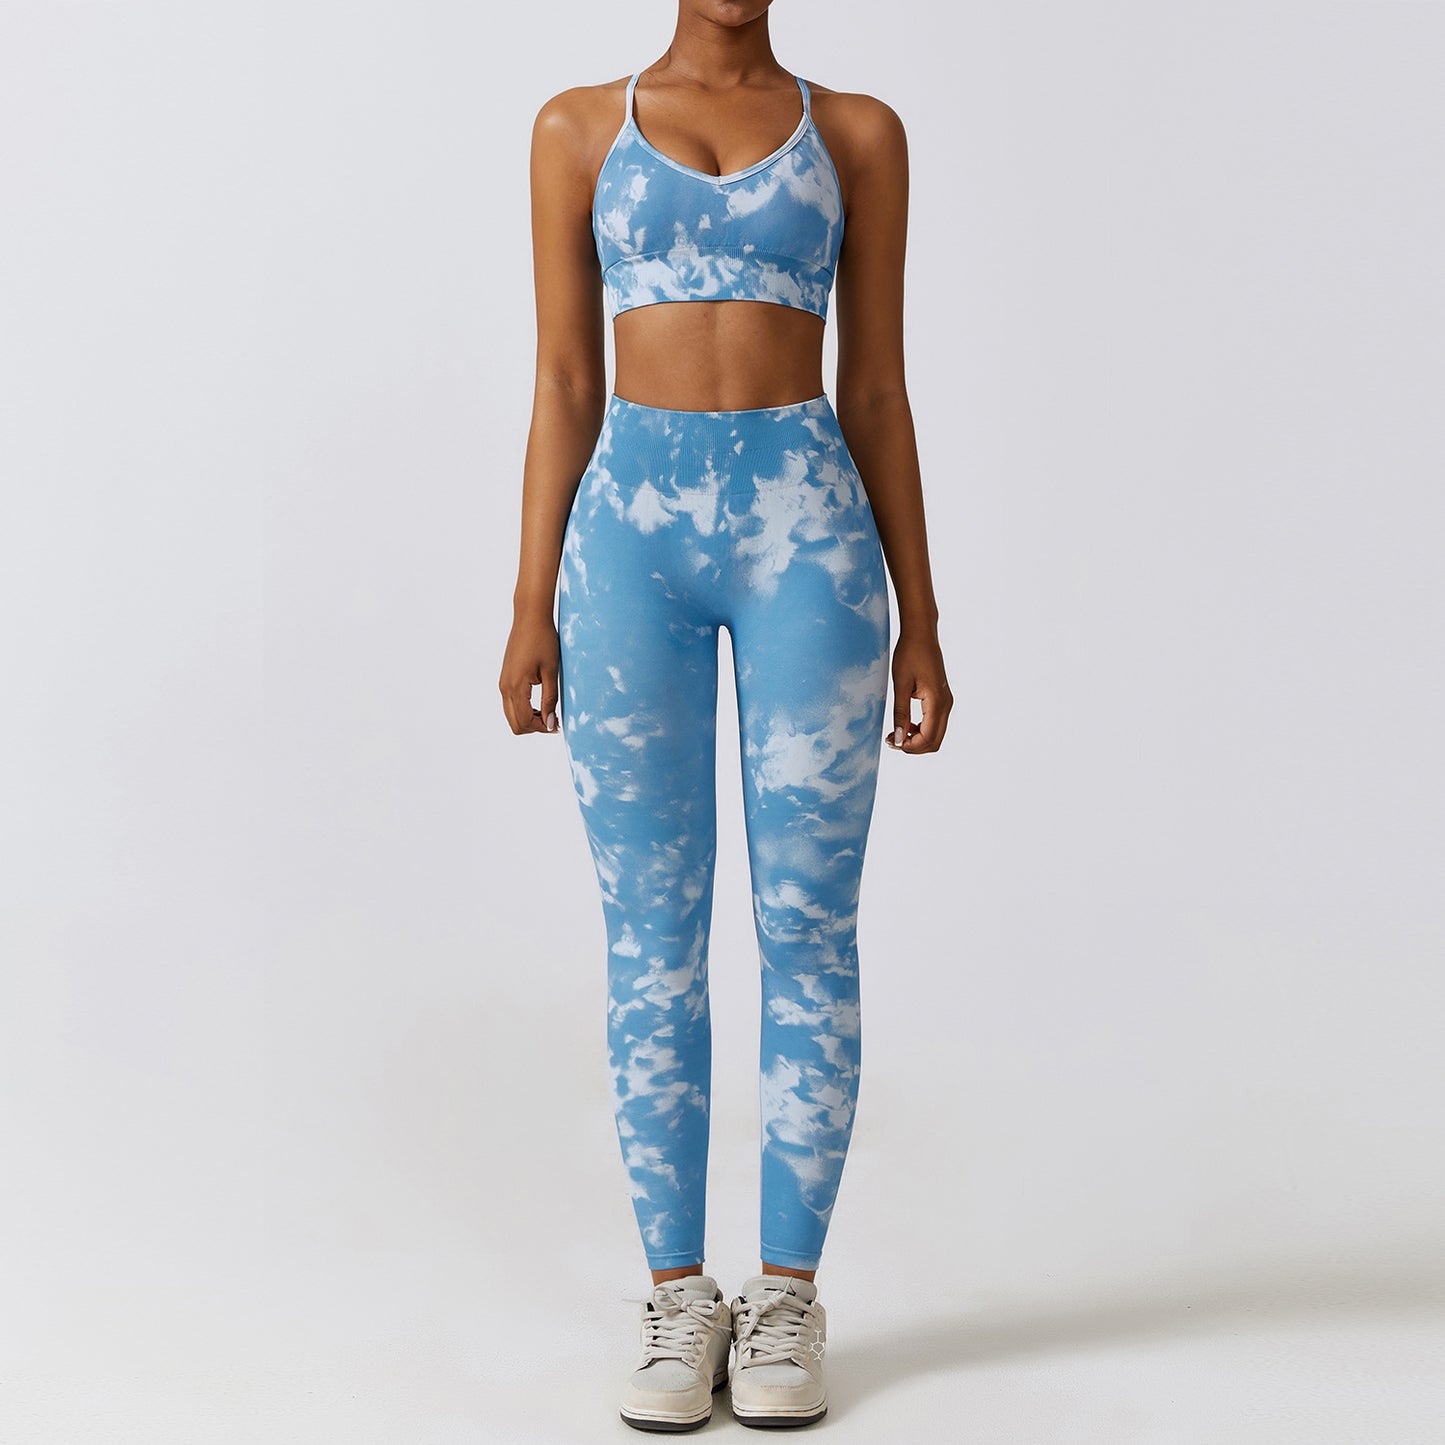 Camouflage Printing Seamless Yoga Suit Quick-drying High Waist Running Workout Clothes